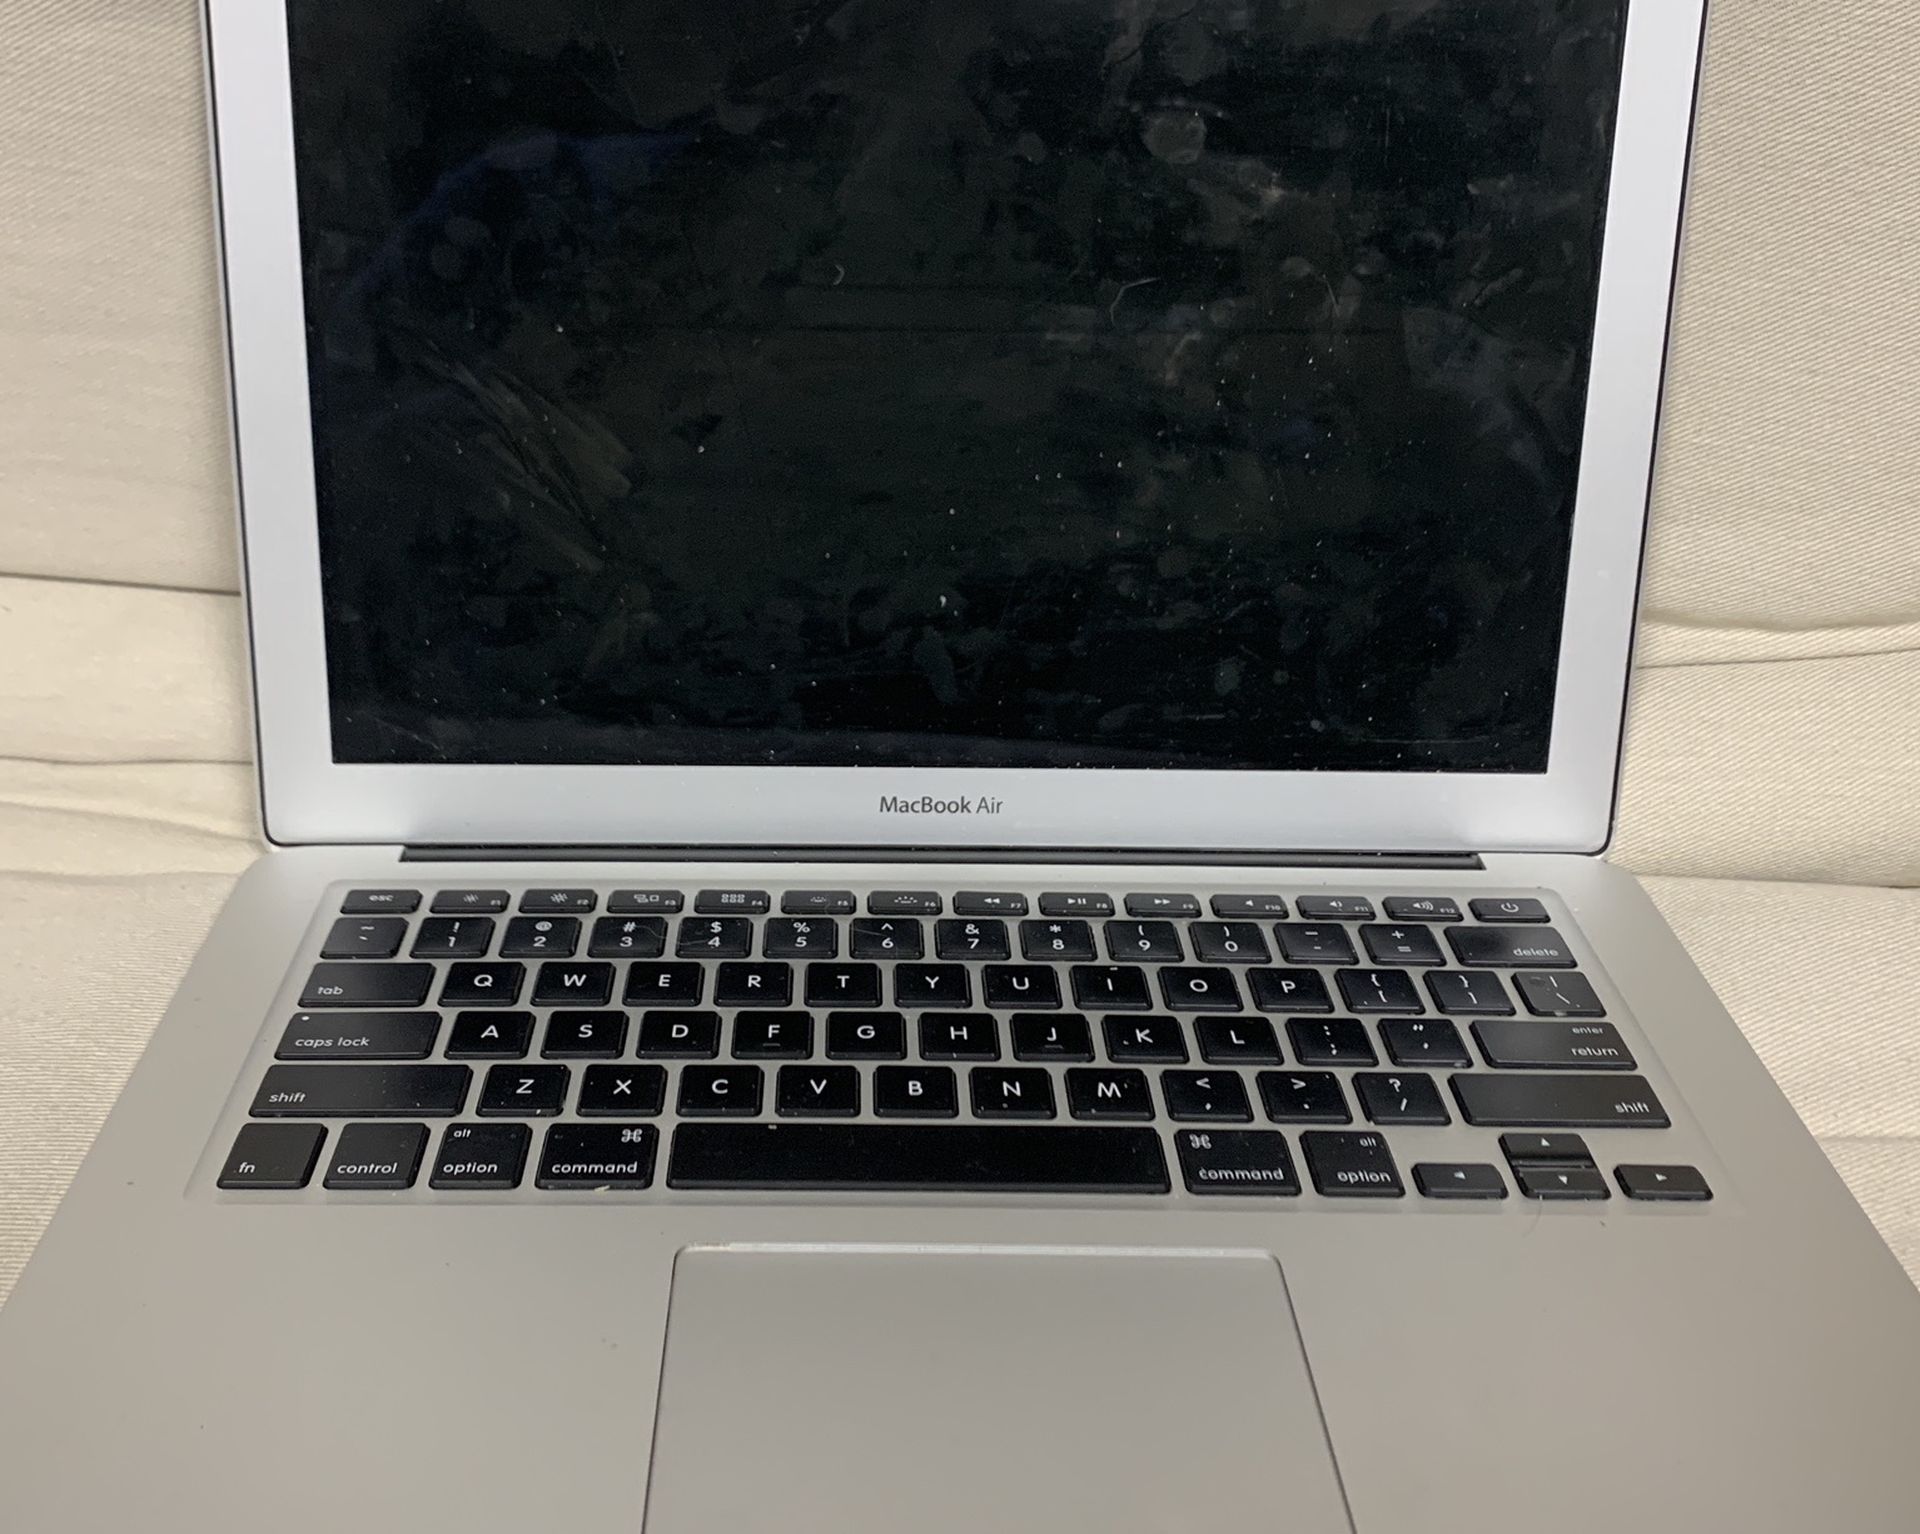 MacBook Air 2015 With 13” Screen And 128g Hard Drive